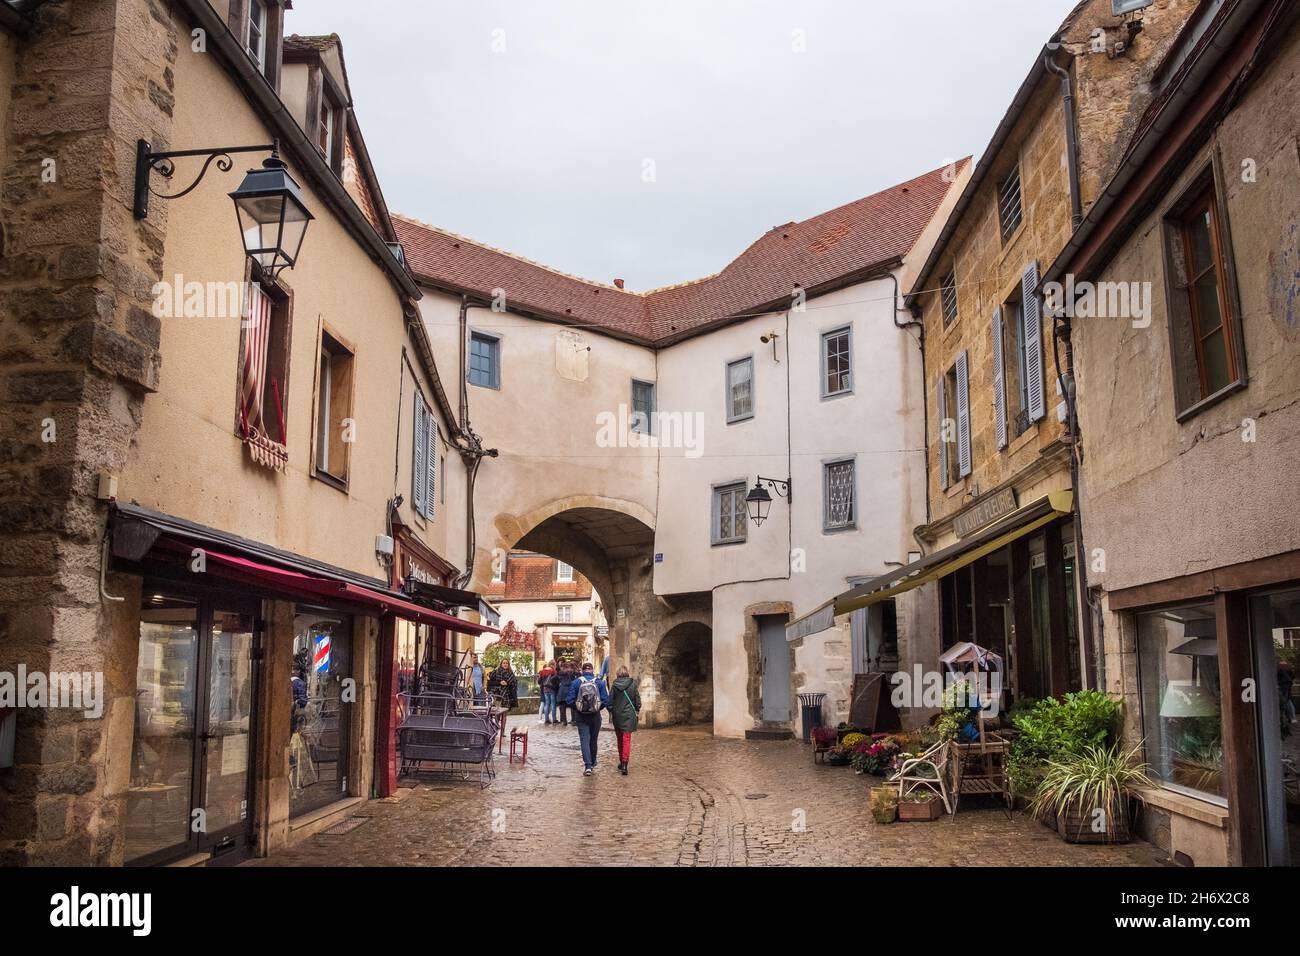 The east gate, looking out from the medieval heart of Semur en Auxois, France Stock Photo